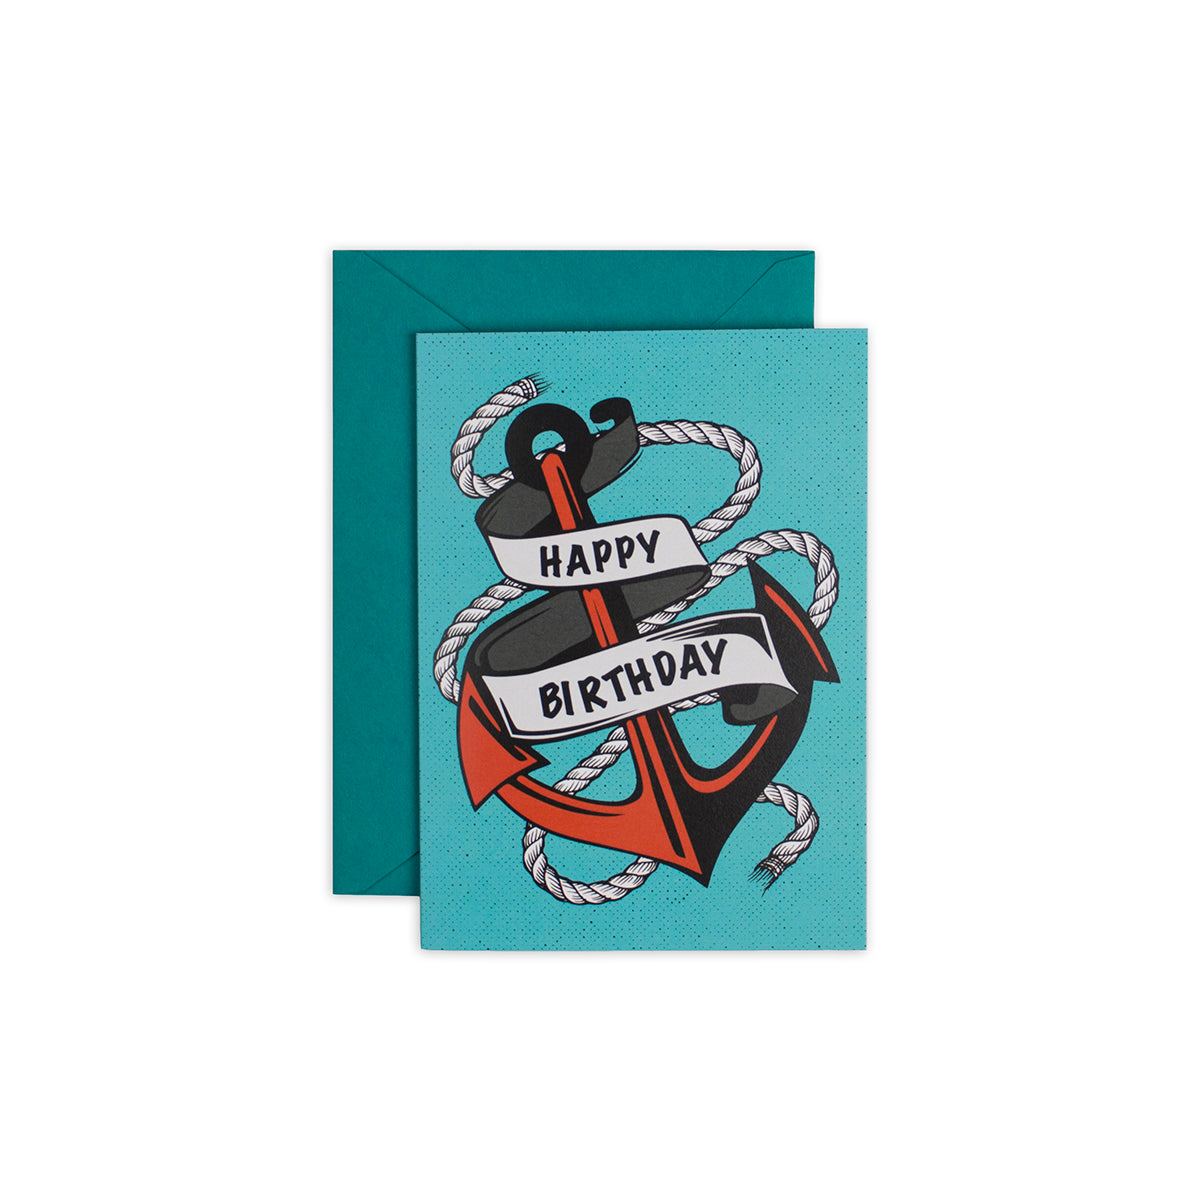 4 1/2" x 6 1/4" teal happy birthday card featuring an anchor illustration with rope and happy birthday text